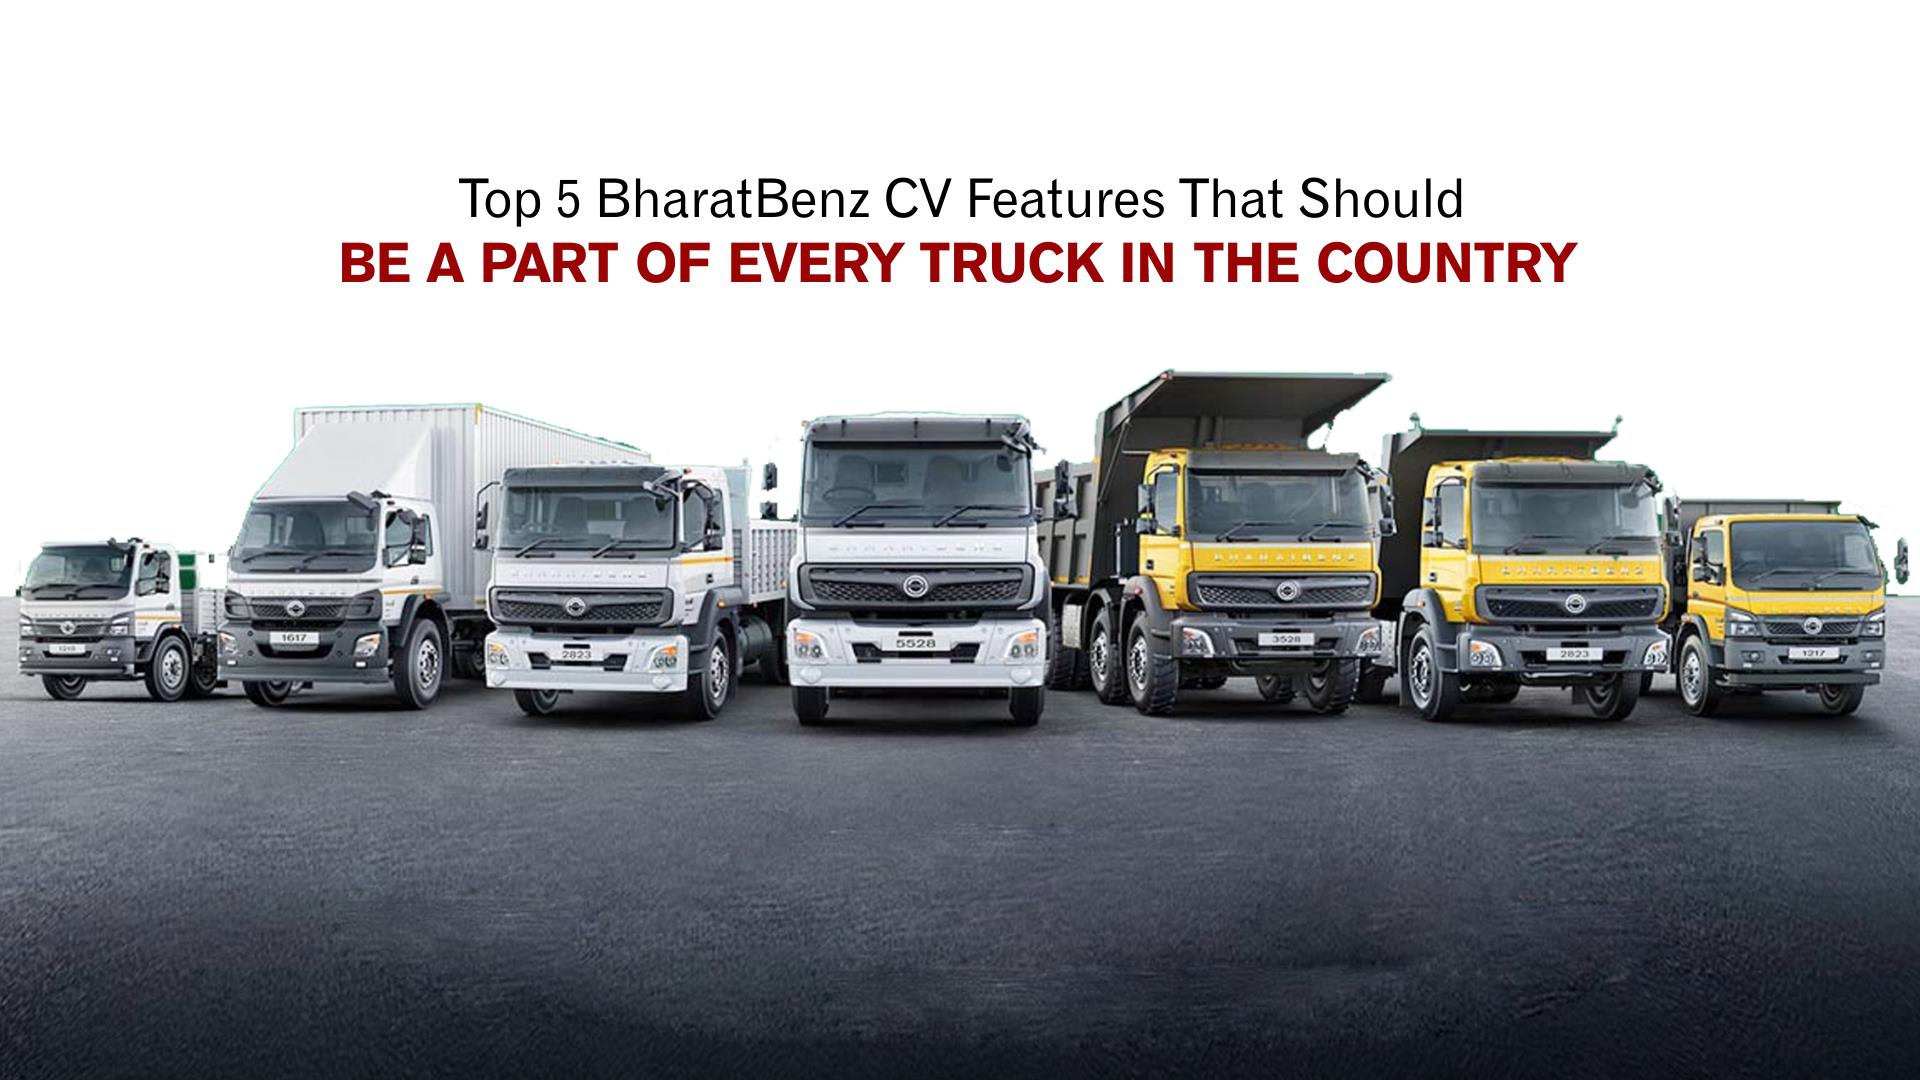 Top 5 BharatBenz CV Features That Should Be A Part Of Every Truck In The Country